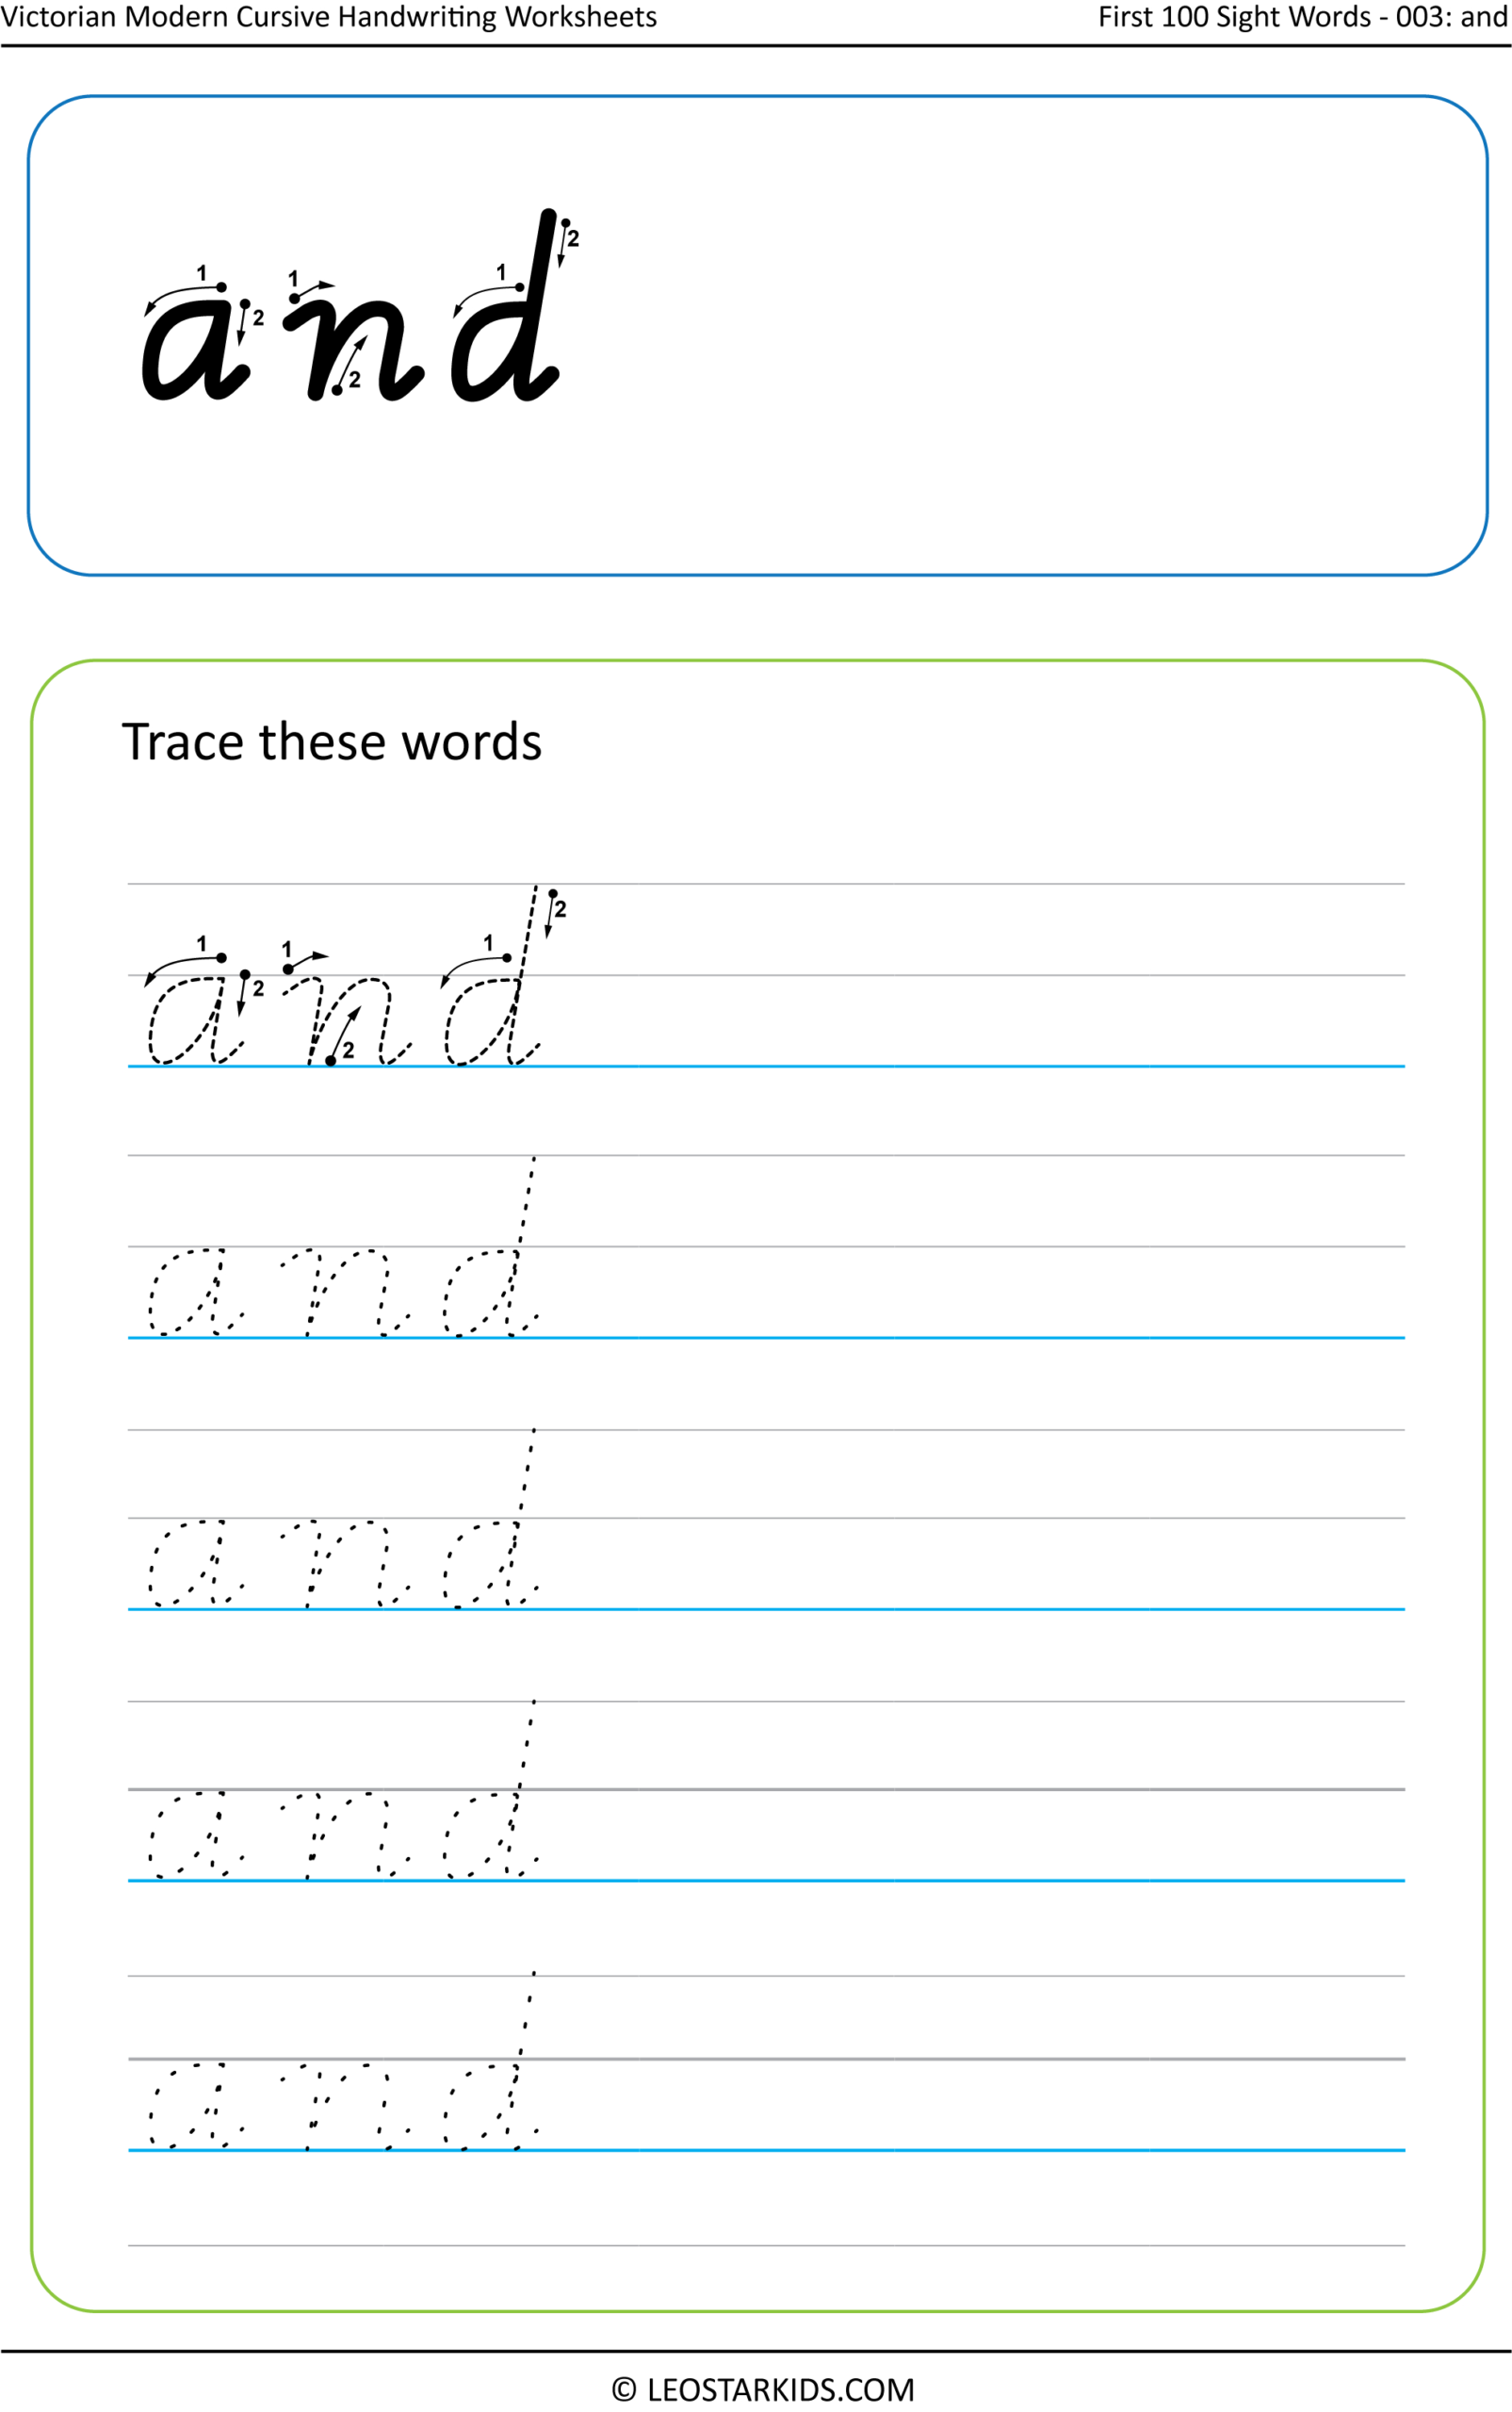 Australian Handwriting Worksheets – Victorian Modern Cursive with Victoria Name Tracing